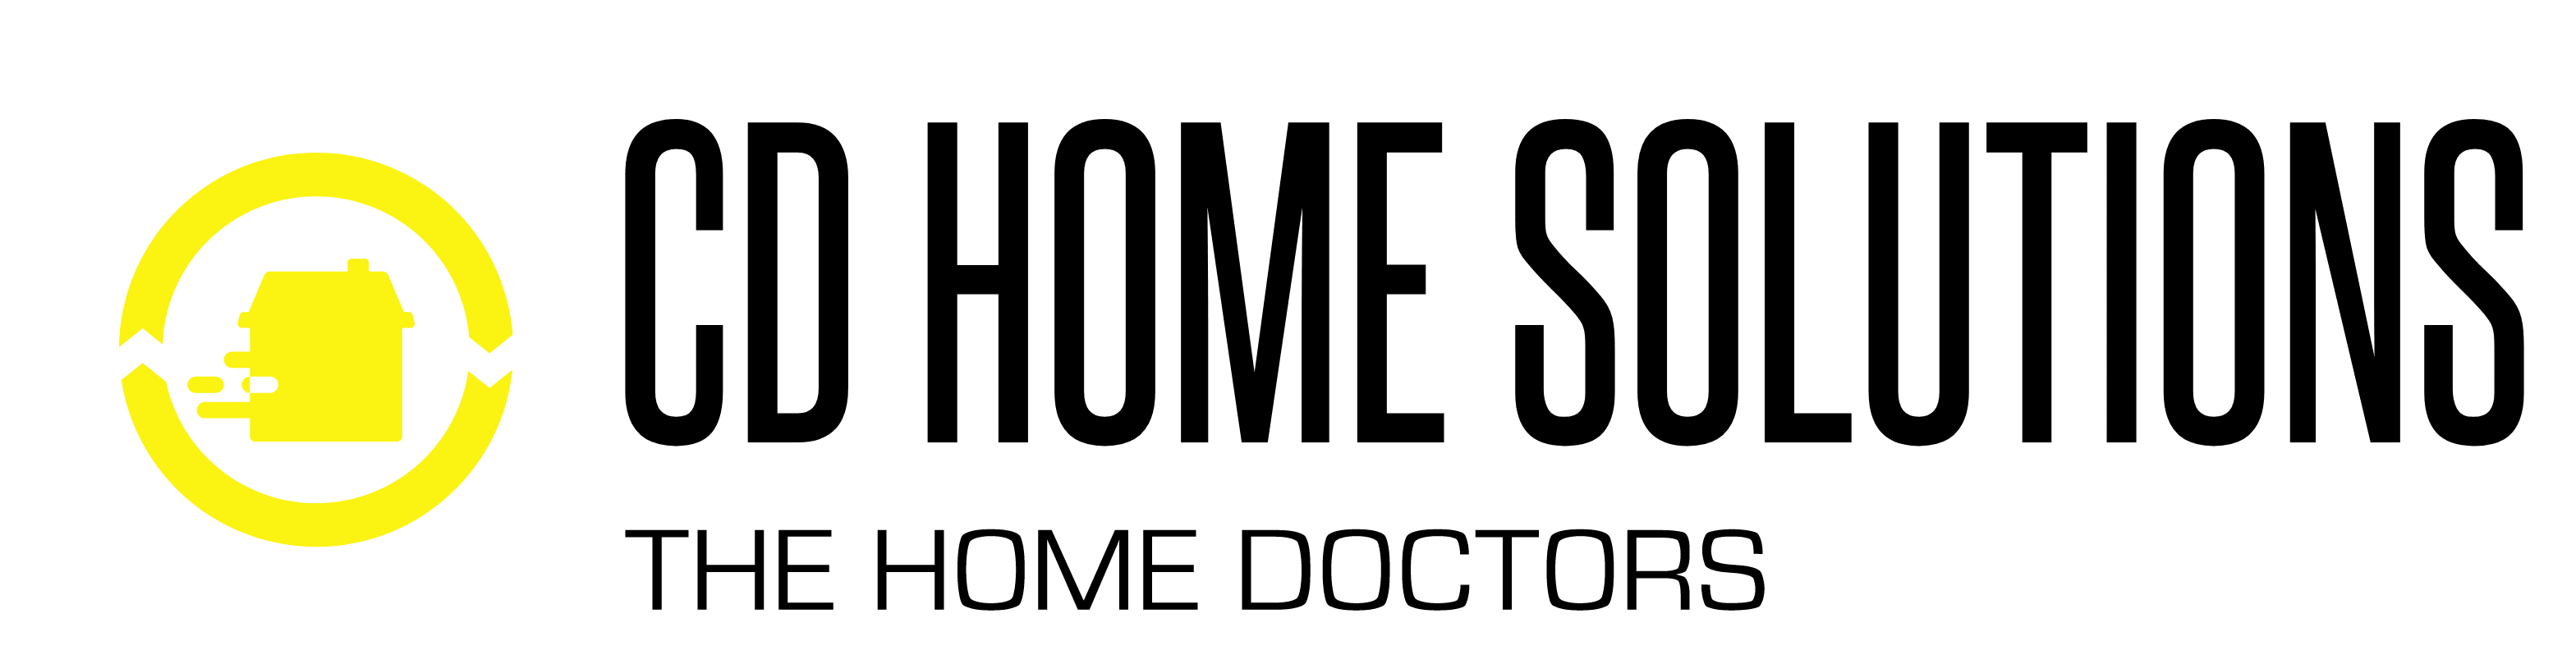 CD Home Solutions - The Home Doctors